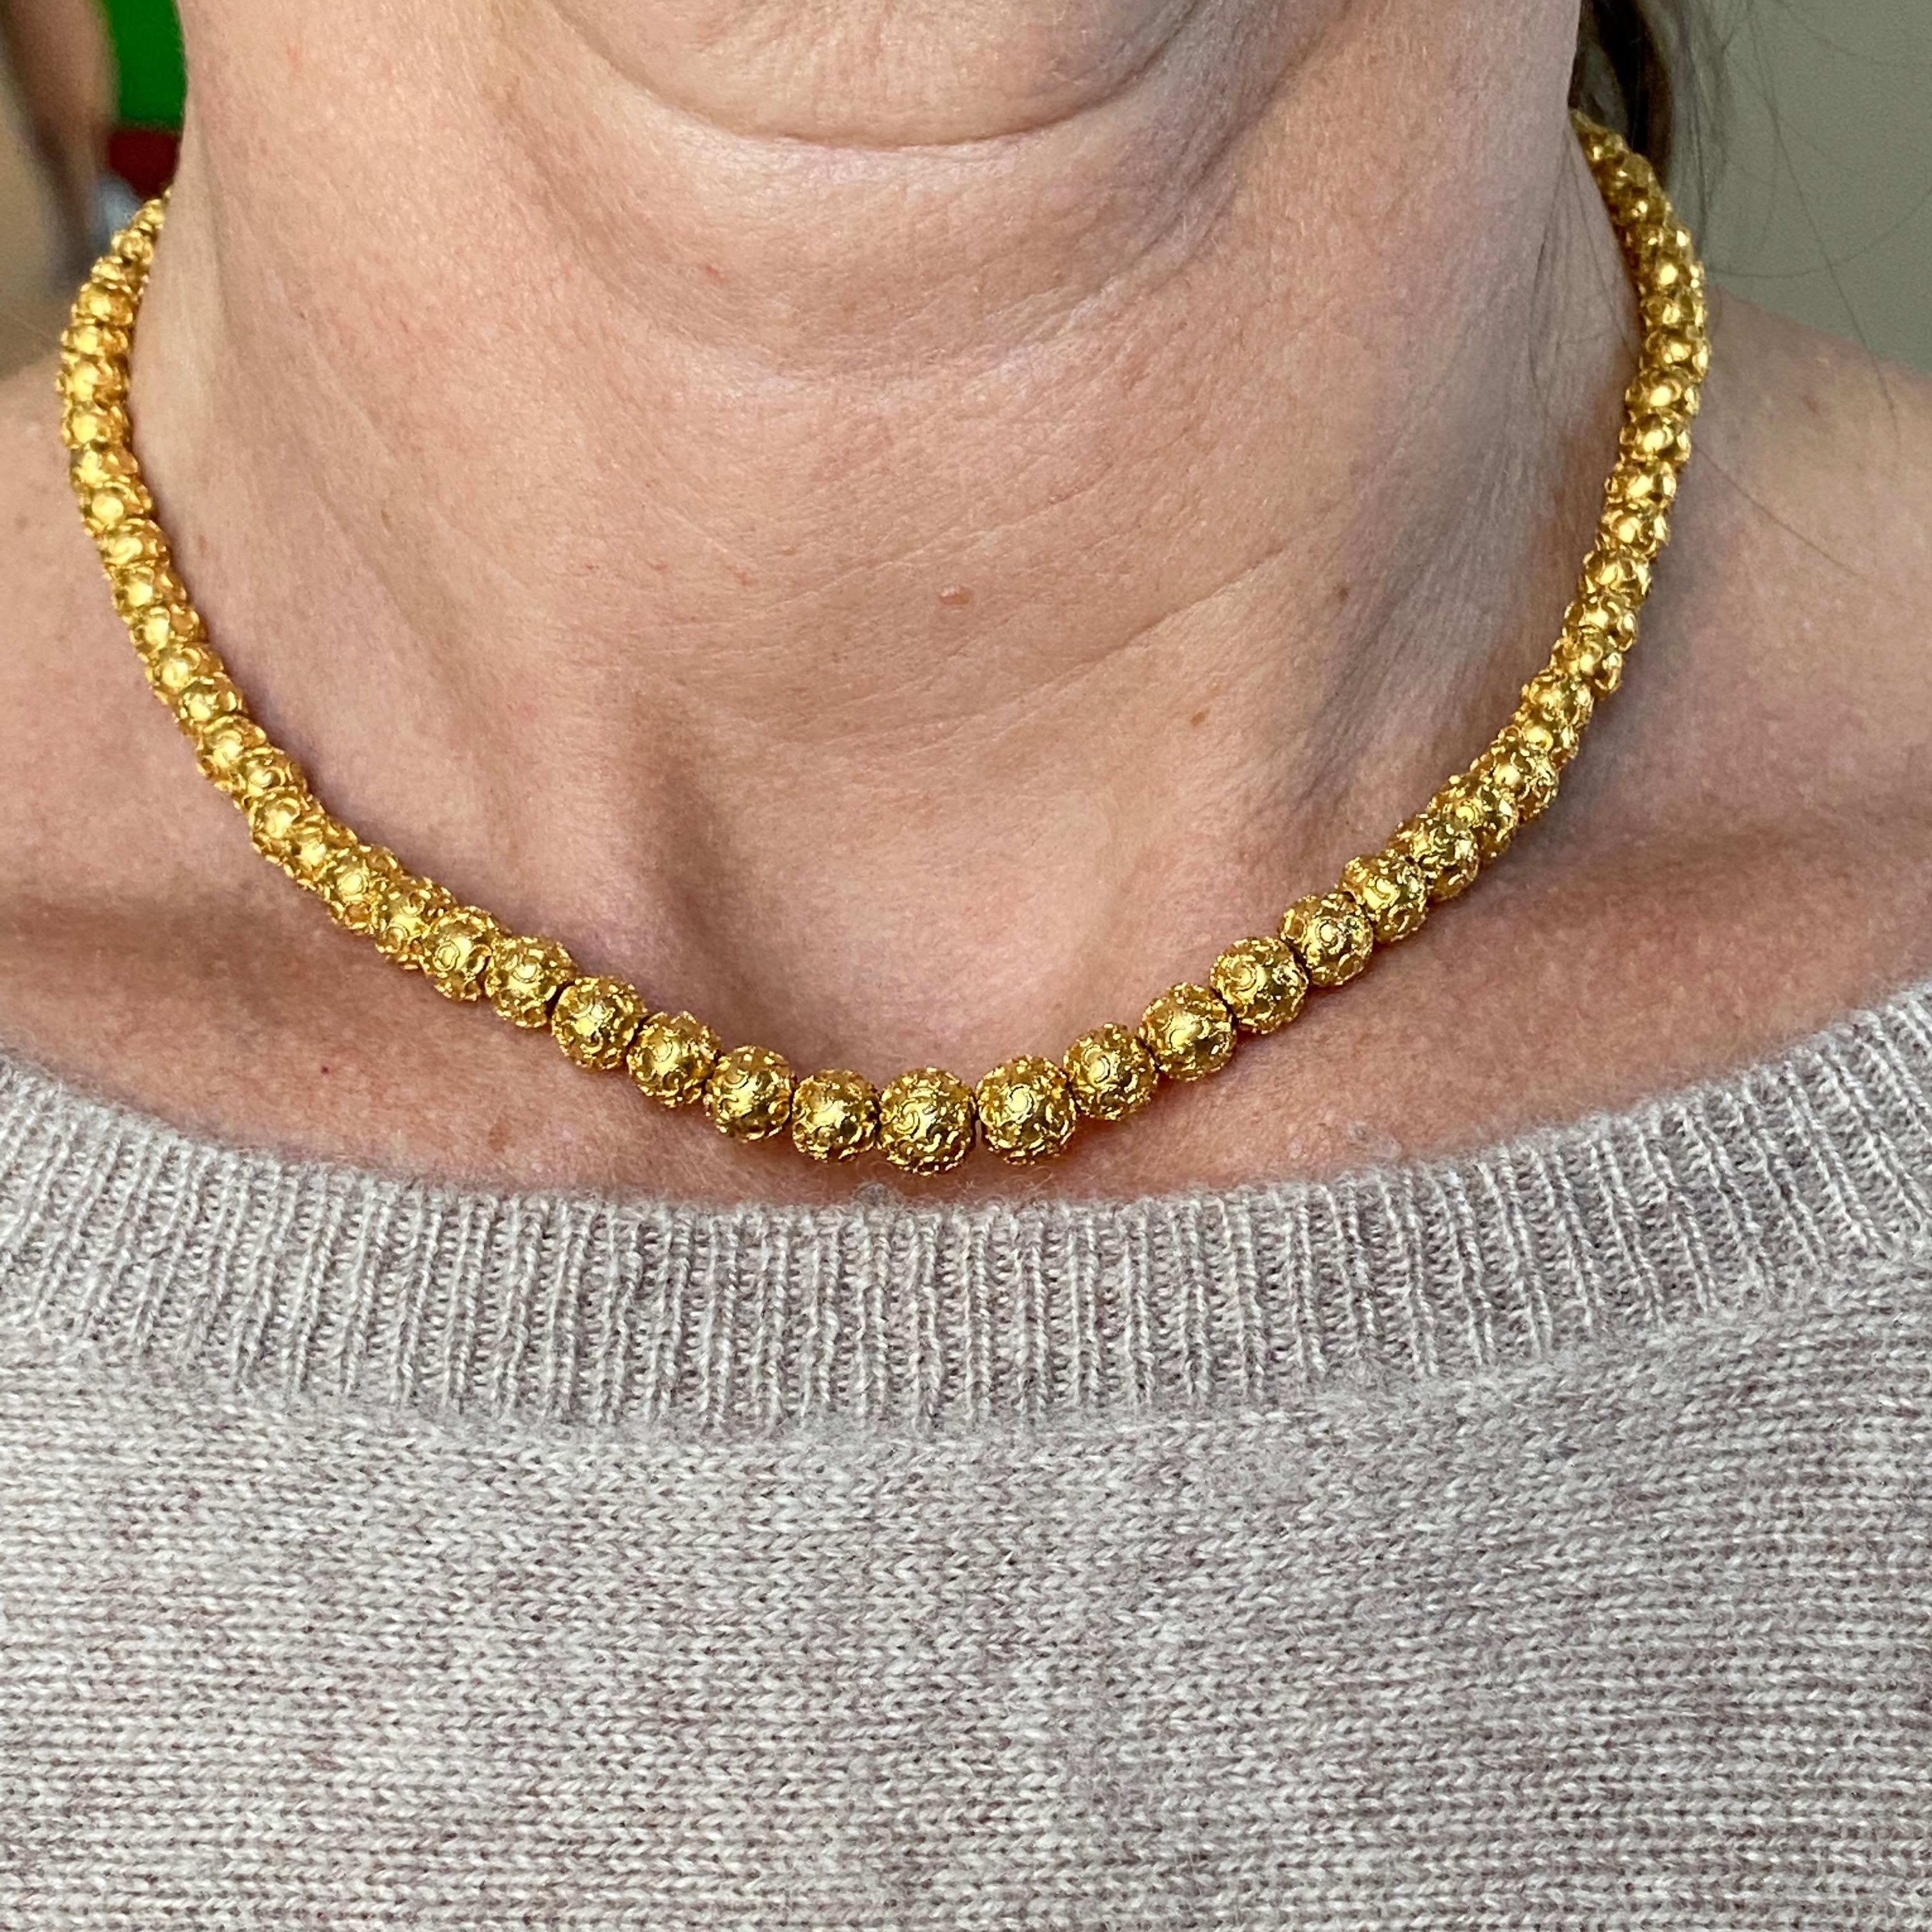 RARE Victorian Etruscan 18/14K Choker Beads Necklace In Good Condition For Sale In Scotts Valley, CA